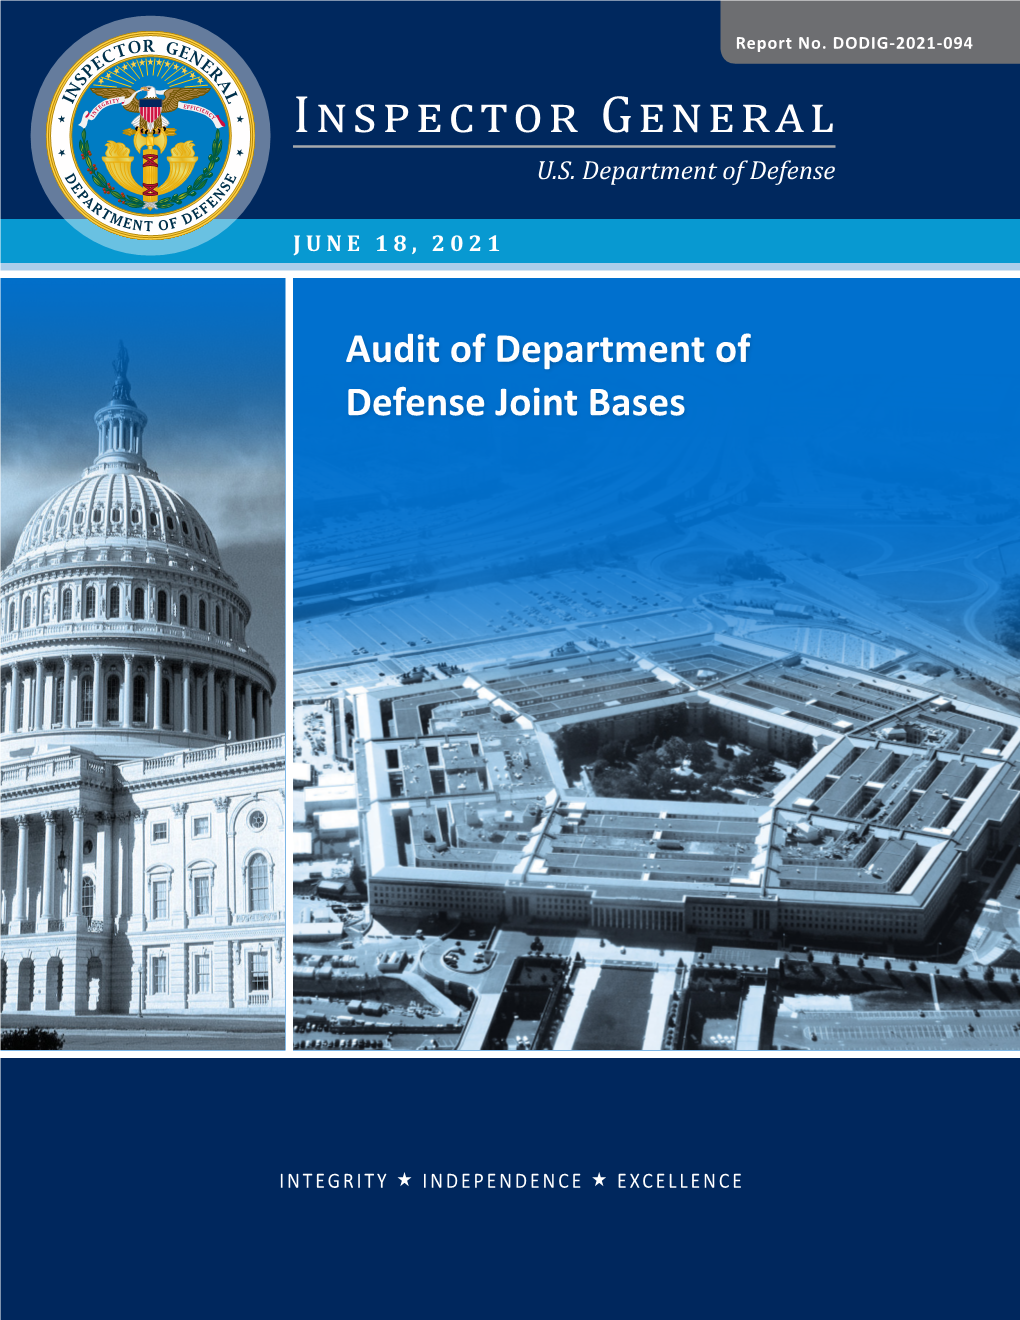 Report No. DODIG-2021-094: Audit of Department of Defense Joint Bases